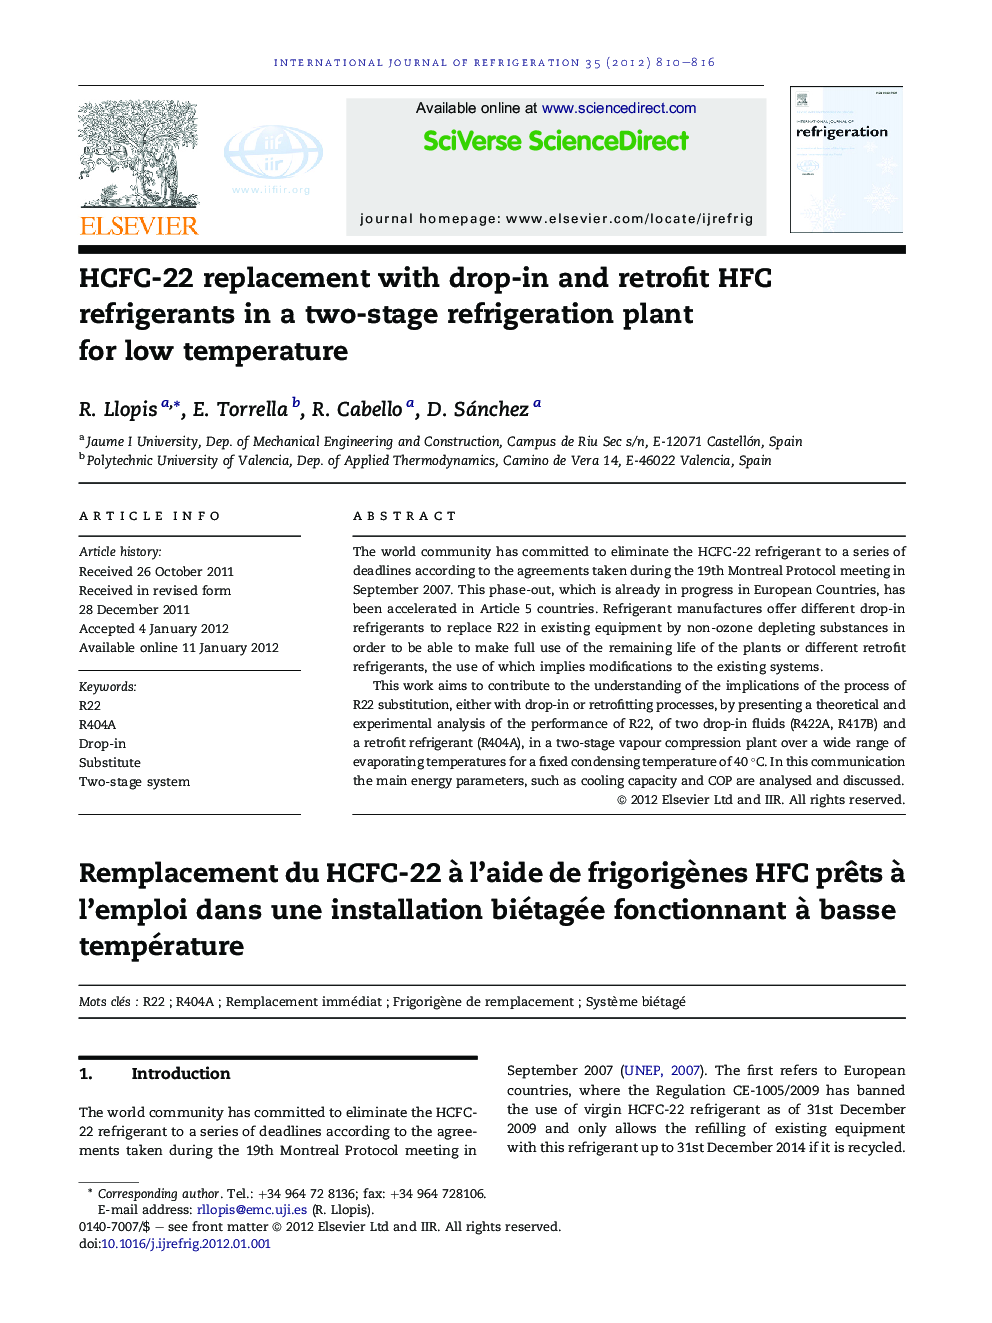 HCFC-22 replacement with drop-in and retrofit HFC refrigerants in a two-stage refrigeration plant for low temperature